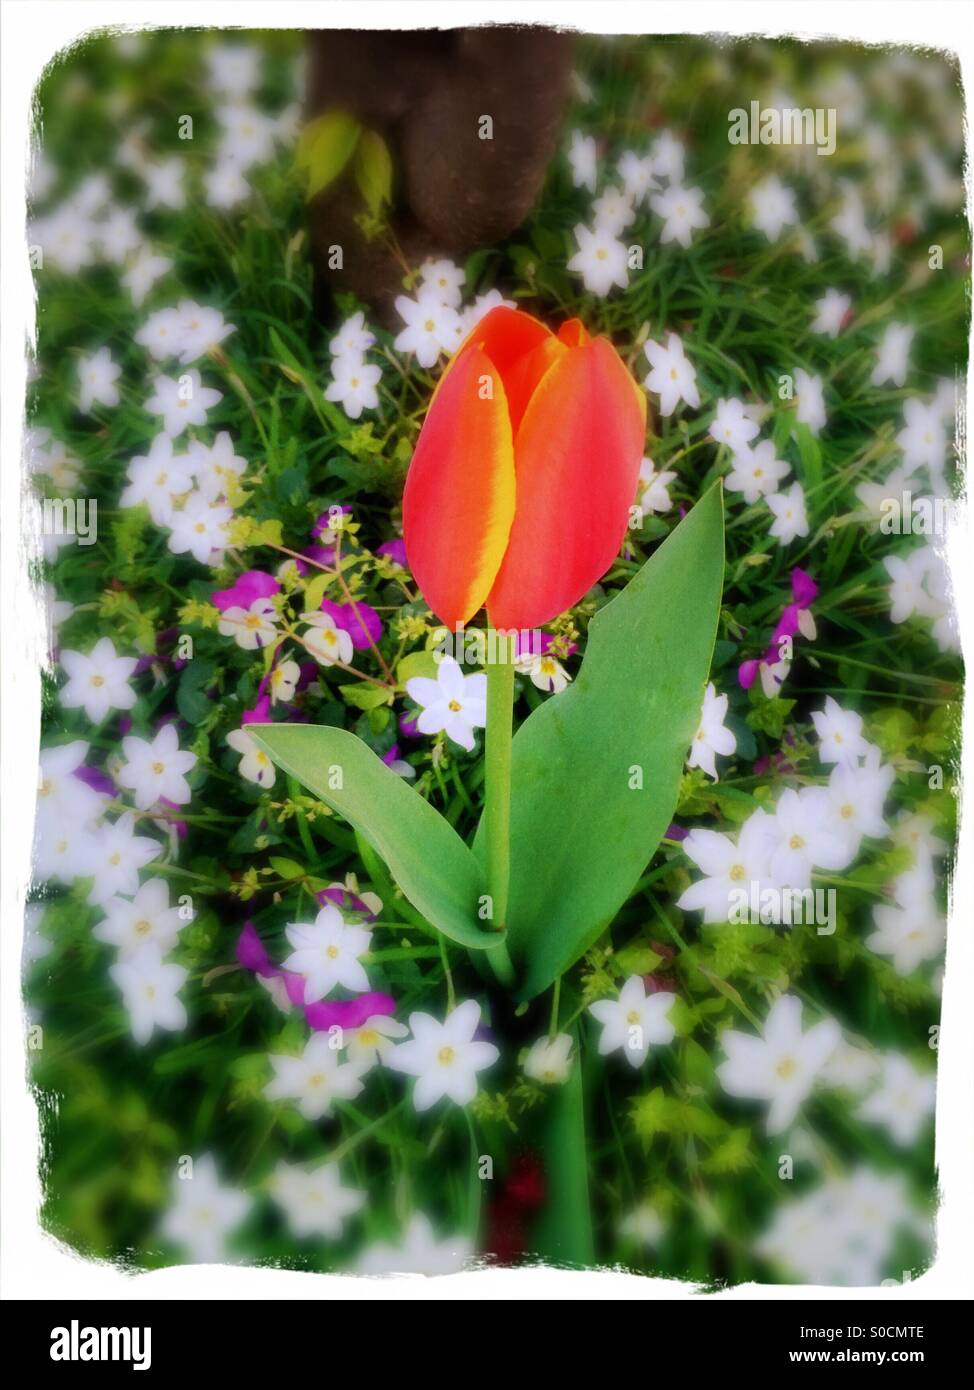 Pretty tulip in graduated tones of deep pink, orange and yellow among a field of green grass, purple pansies and white starflowers in Spring, with blurred edges and painterly white frame. Stock Photo